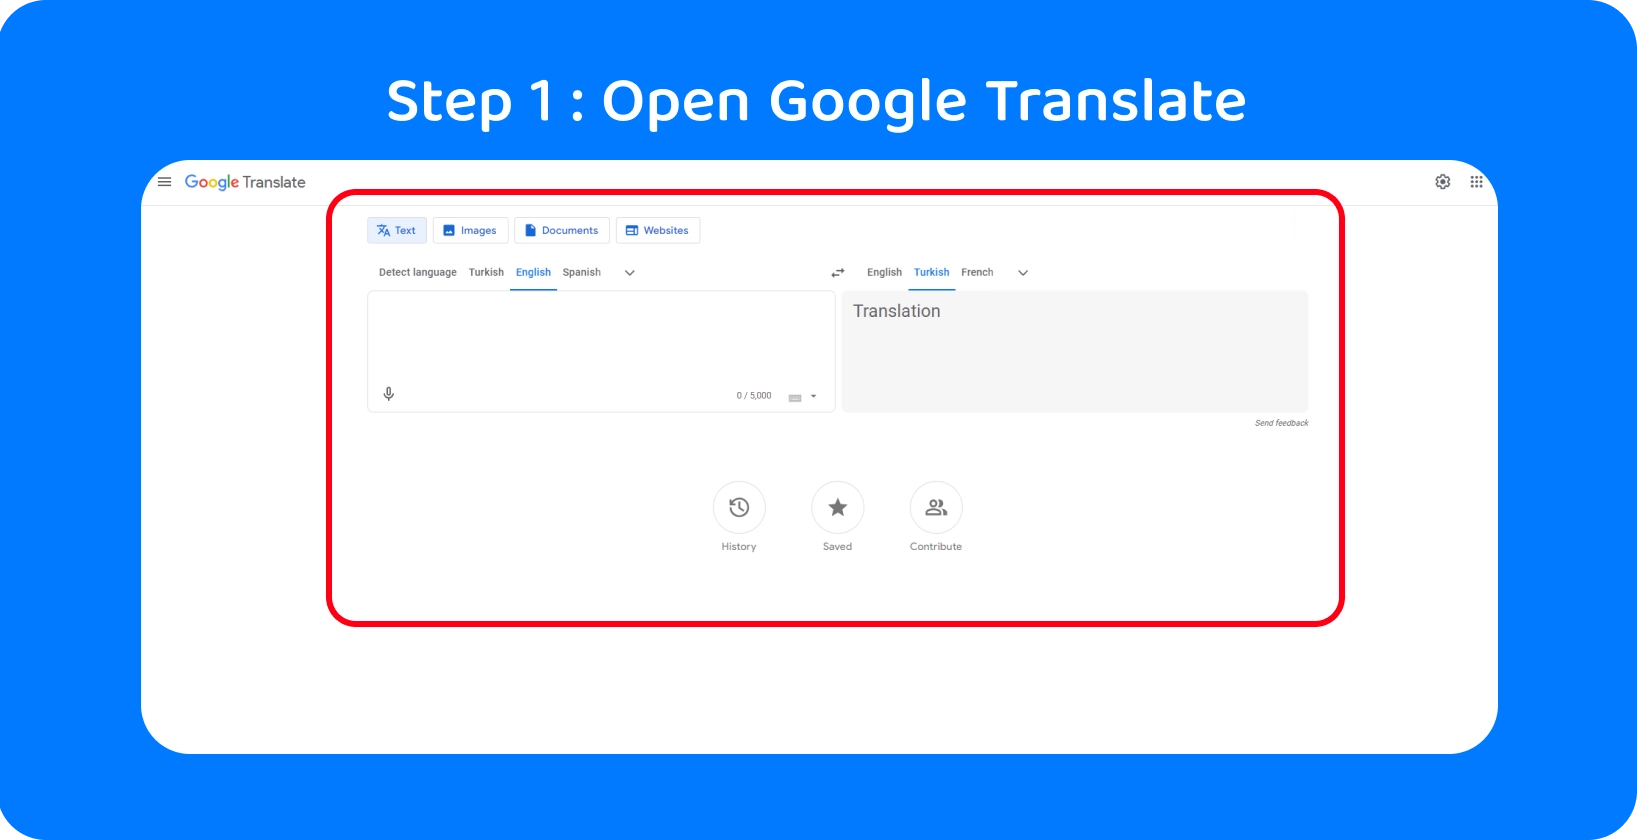 Google Translate interface ready to convert spoken words into text, illustrating Step 1 in the process.